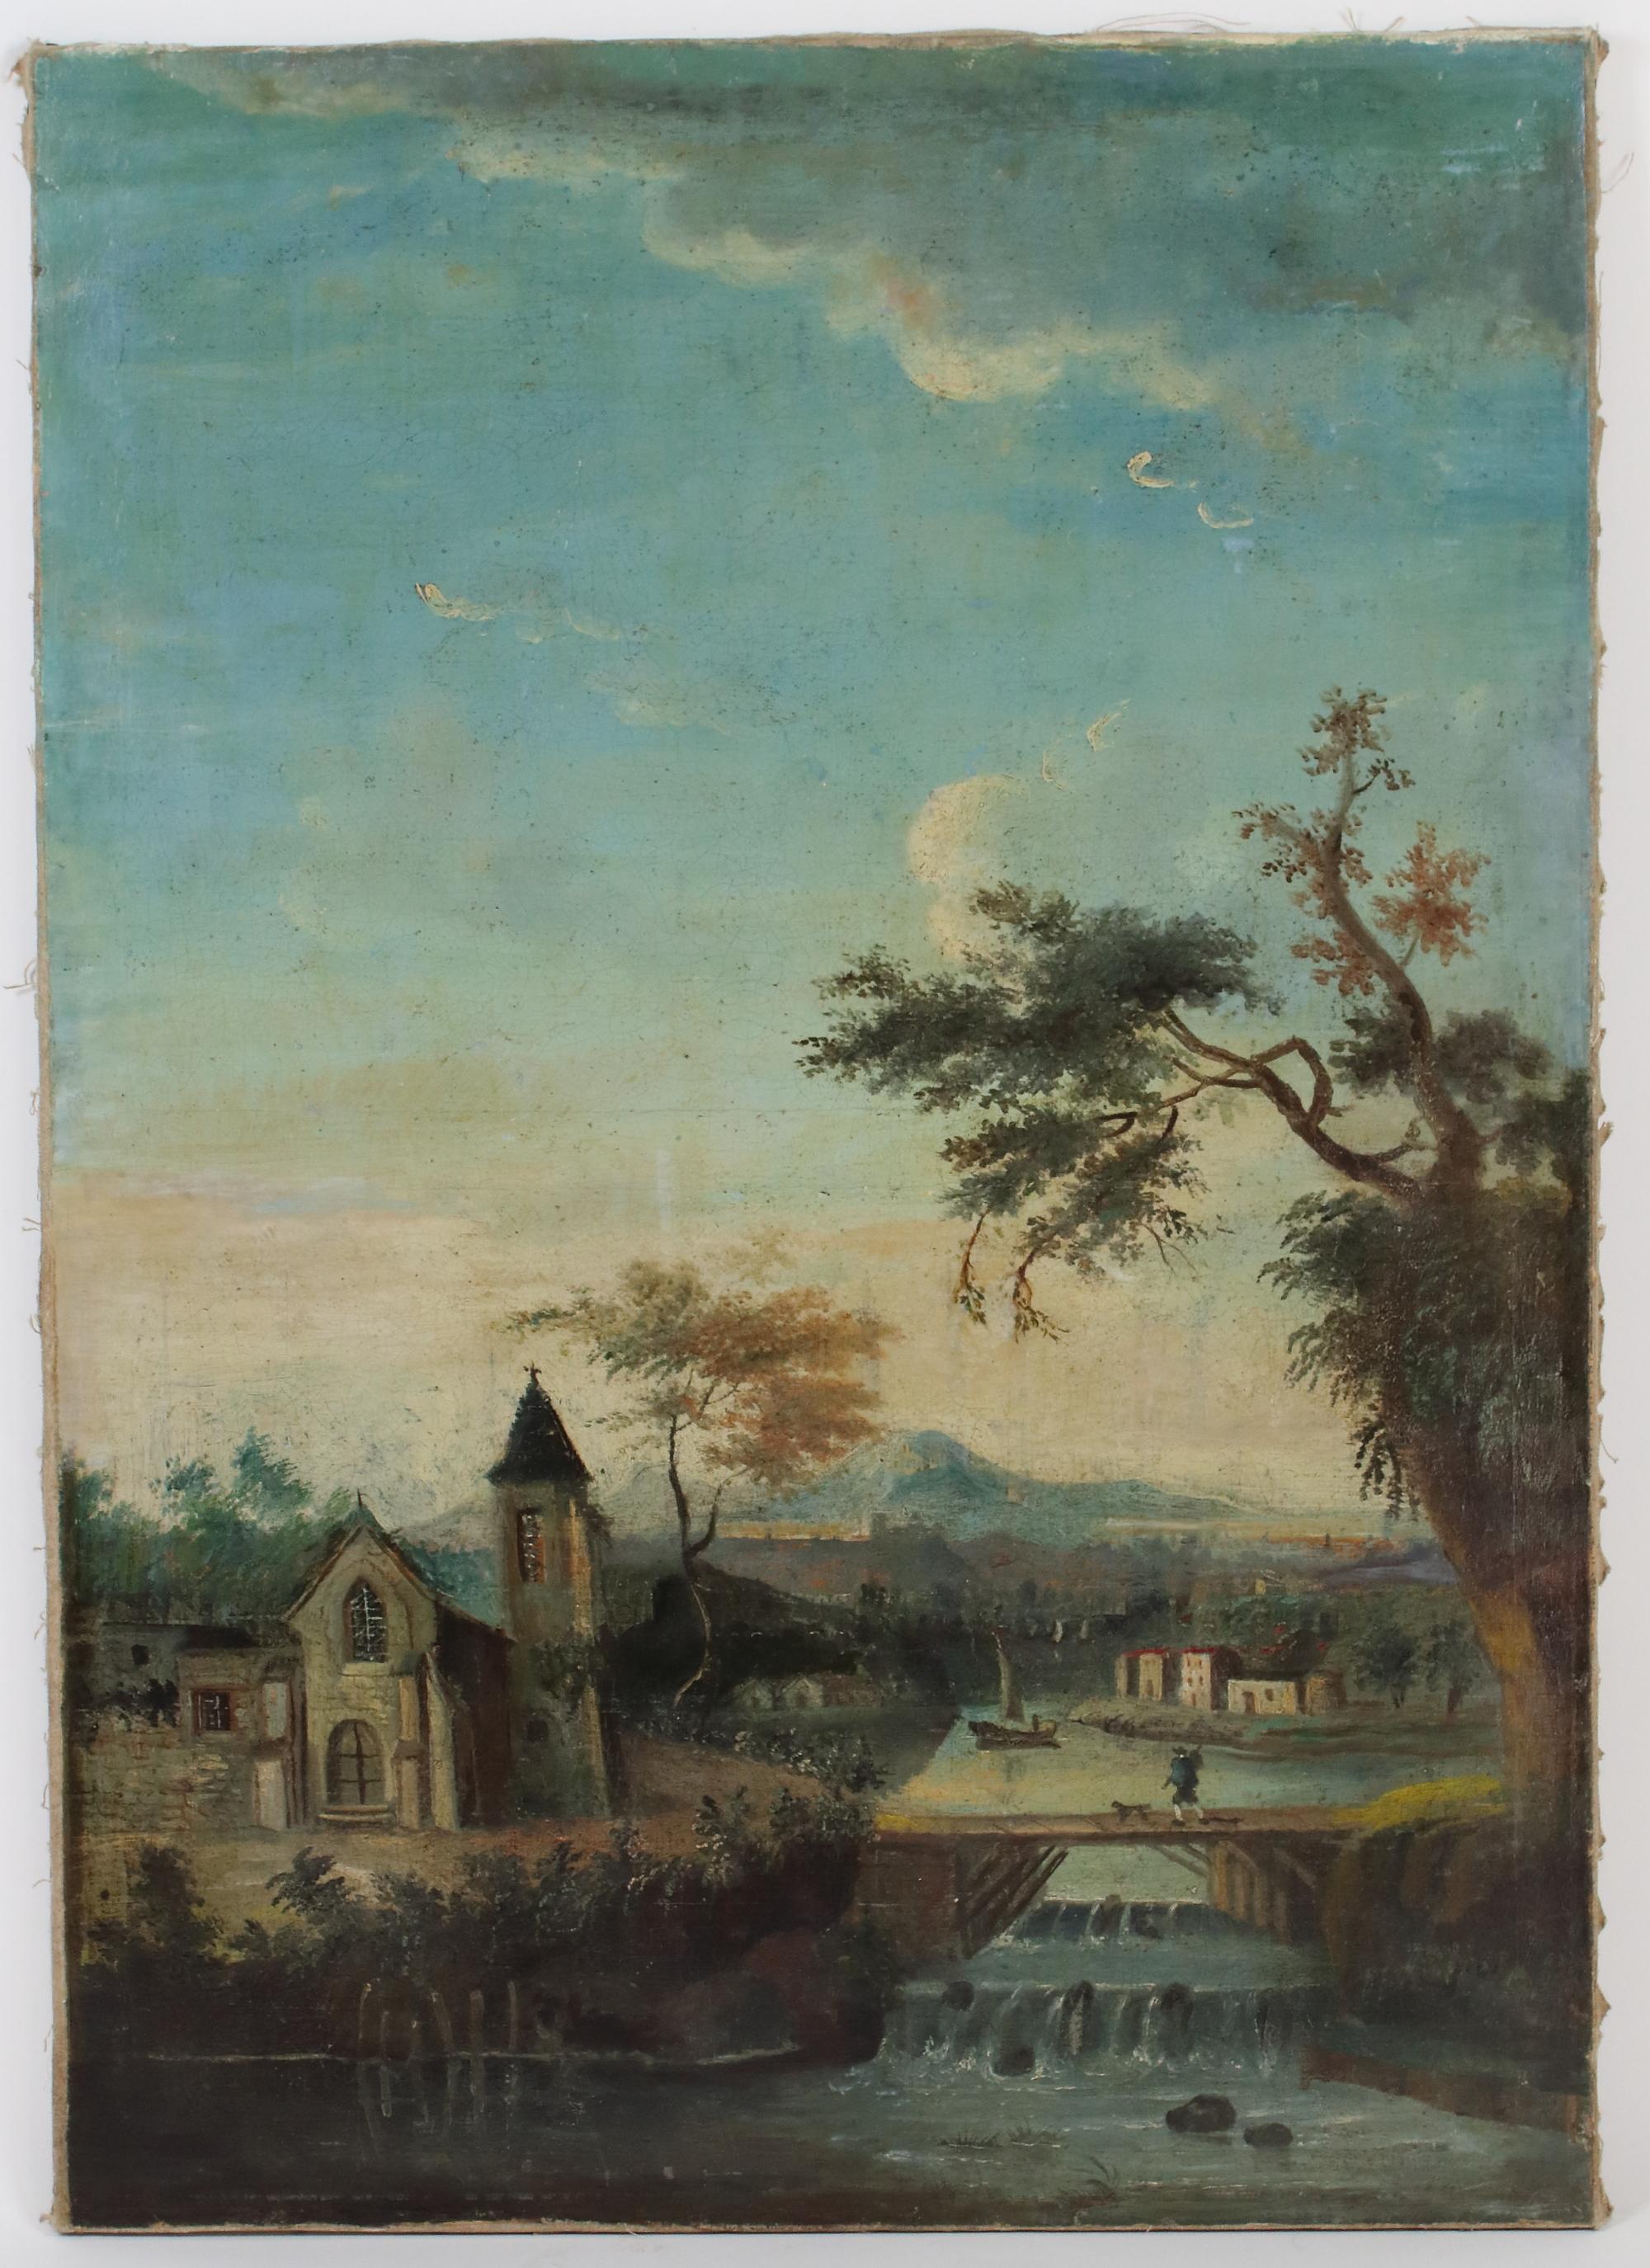 Late 18th Century French Romantic Landscape Painting, oil on Canvas

Charming vertical rectangle ideal french landscape painting, painted in oil on canvas depicting a small village at the banks of a river, the forefront showing wooden brigde which